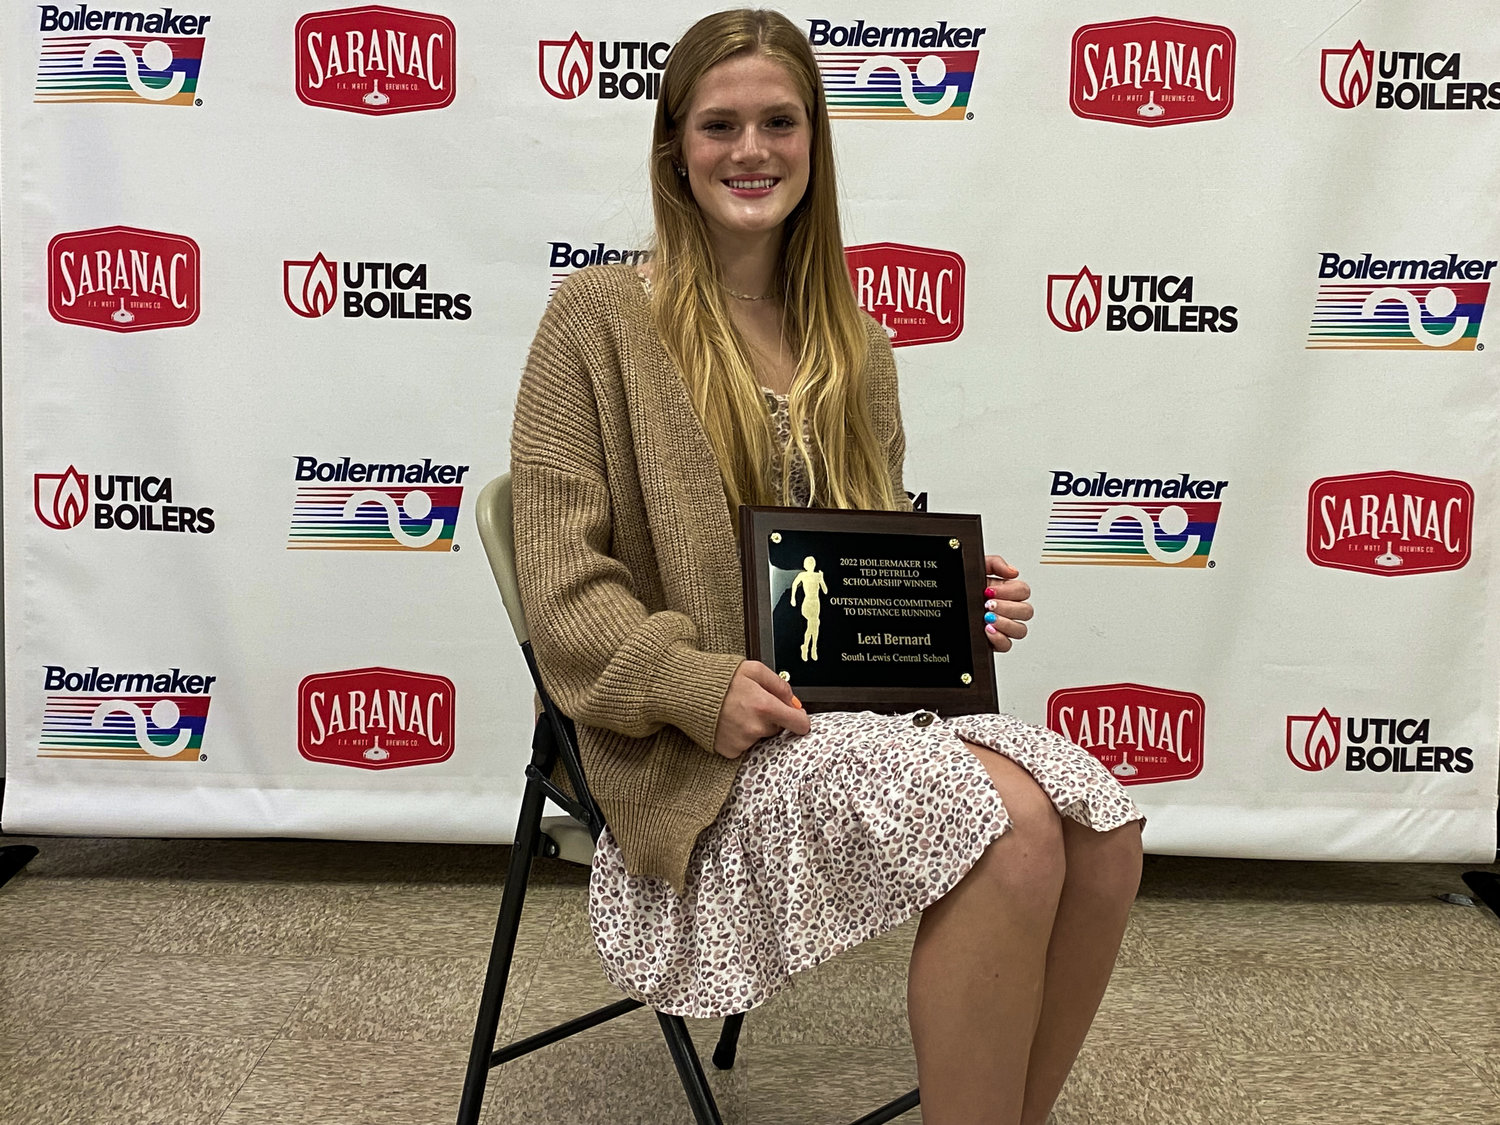 Lexi Bernard, winner of the 2022 Boilermaker Road Race Ted Petrillo Scholarship for Outstanding Commitment to Distance Running.